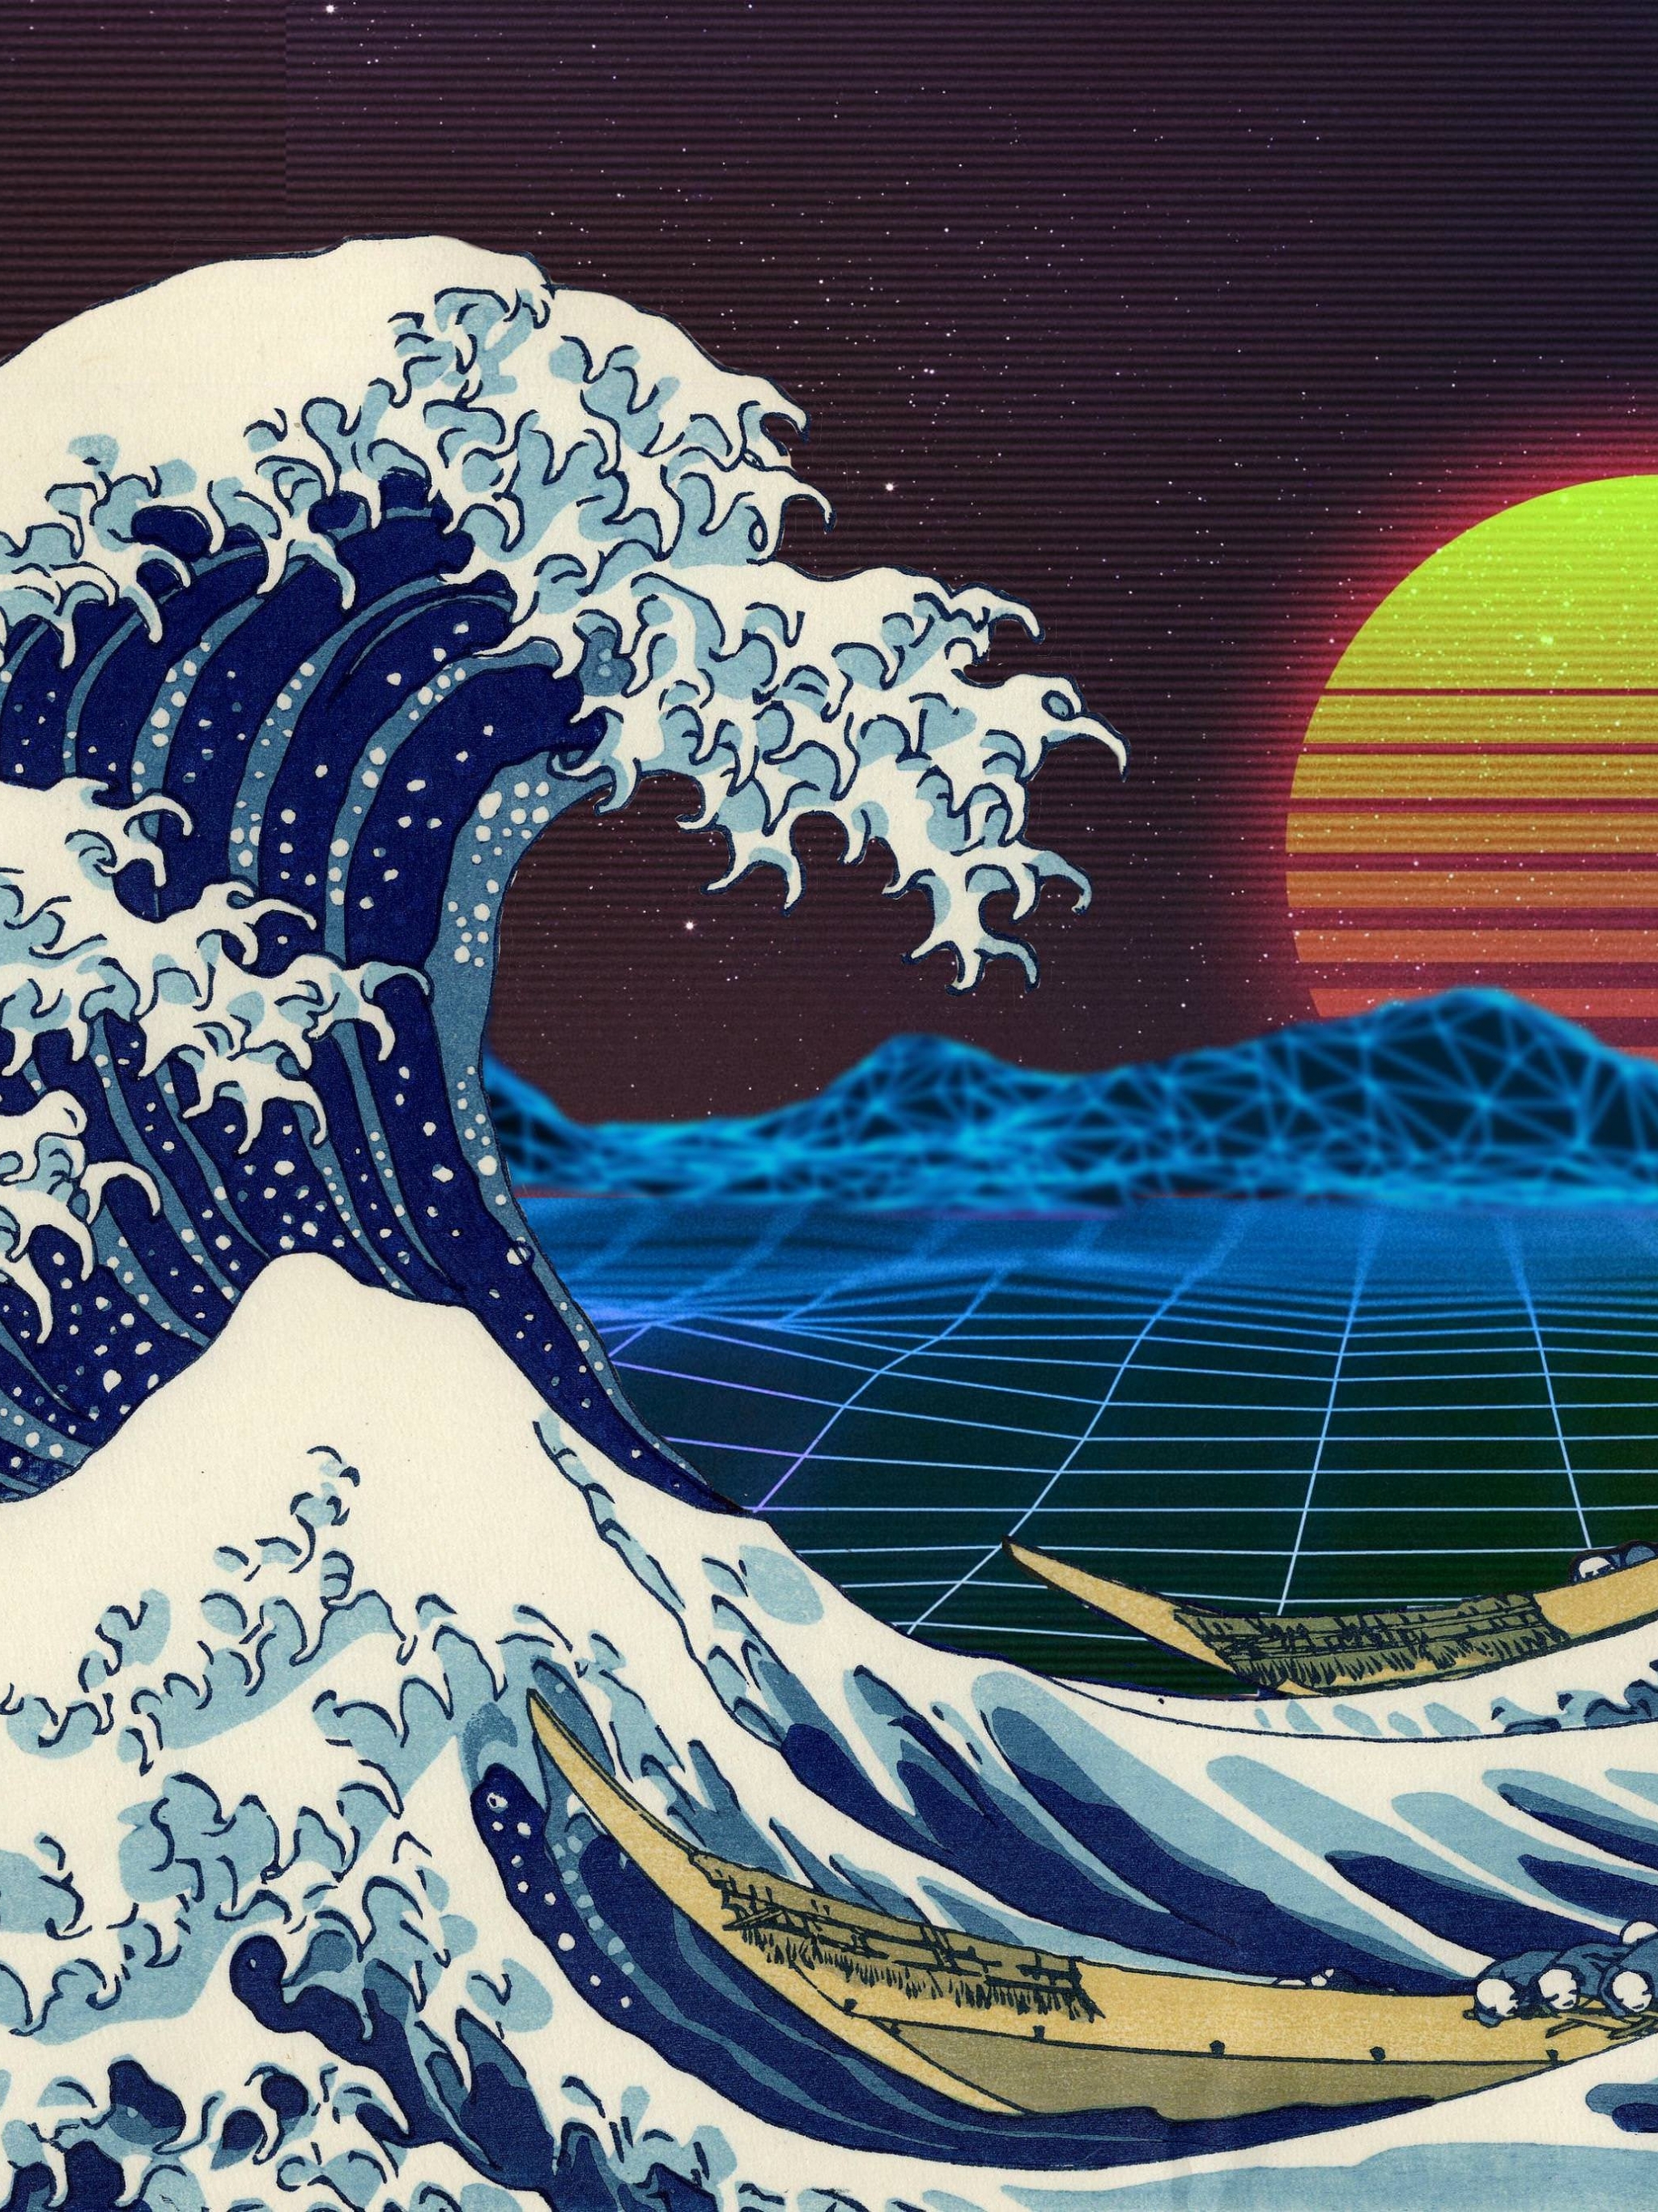 Redesigned My Retrowave Wallpaper To Be In Full 4k - Great Wave Off Kanagawa Animal Crossing , HD Wallpaper & Backgrounds